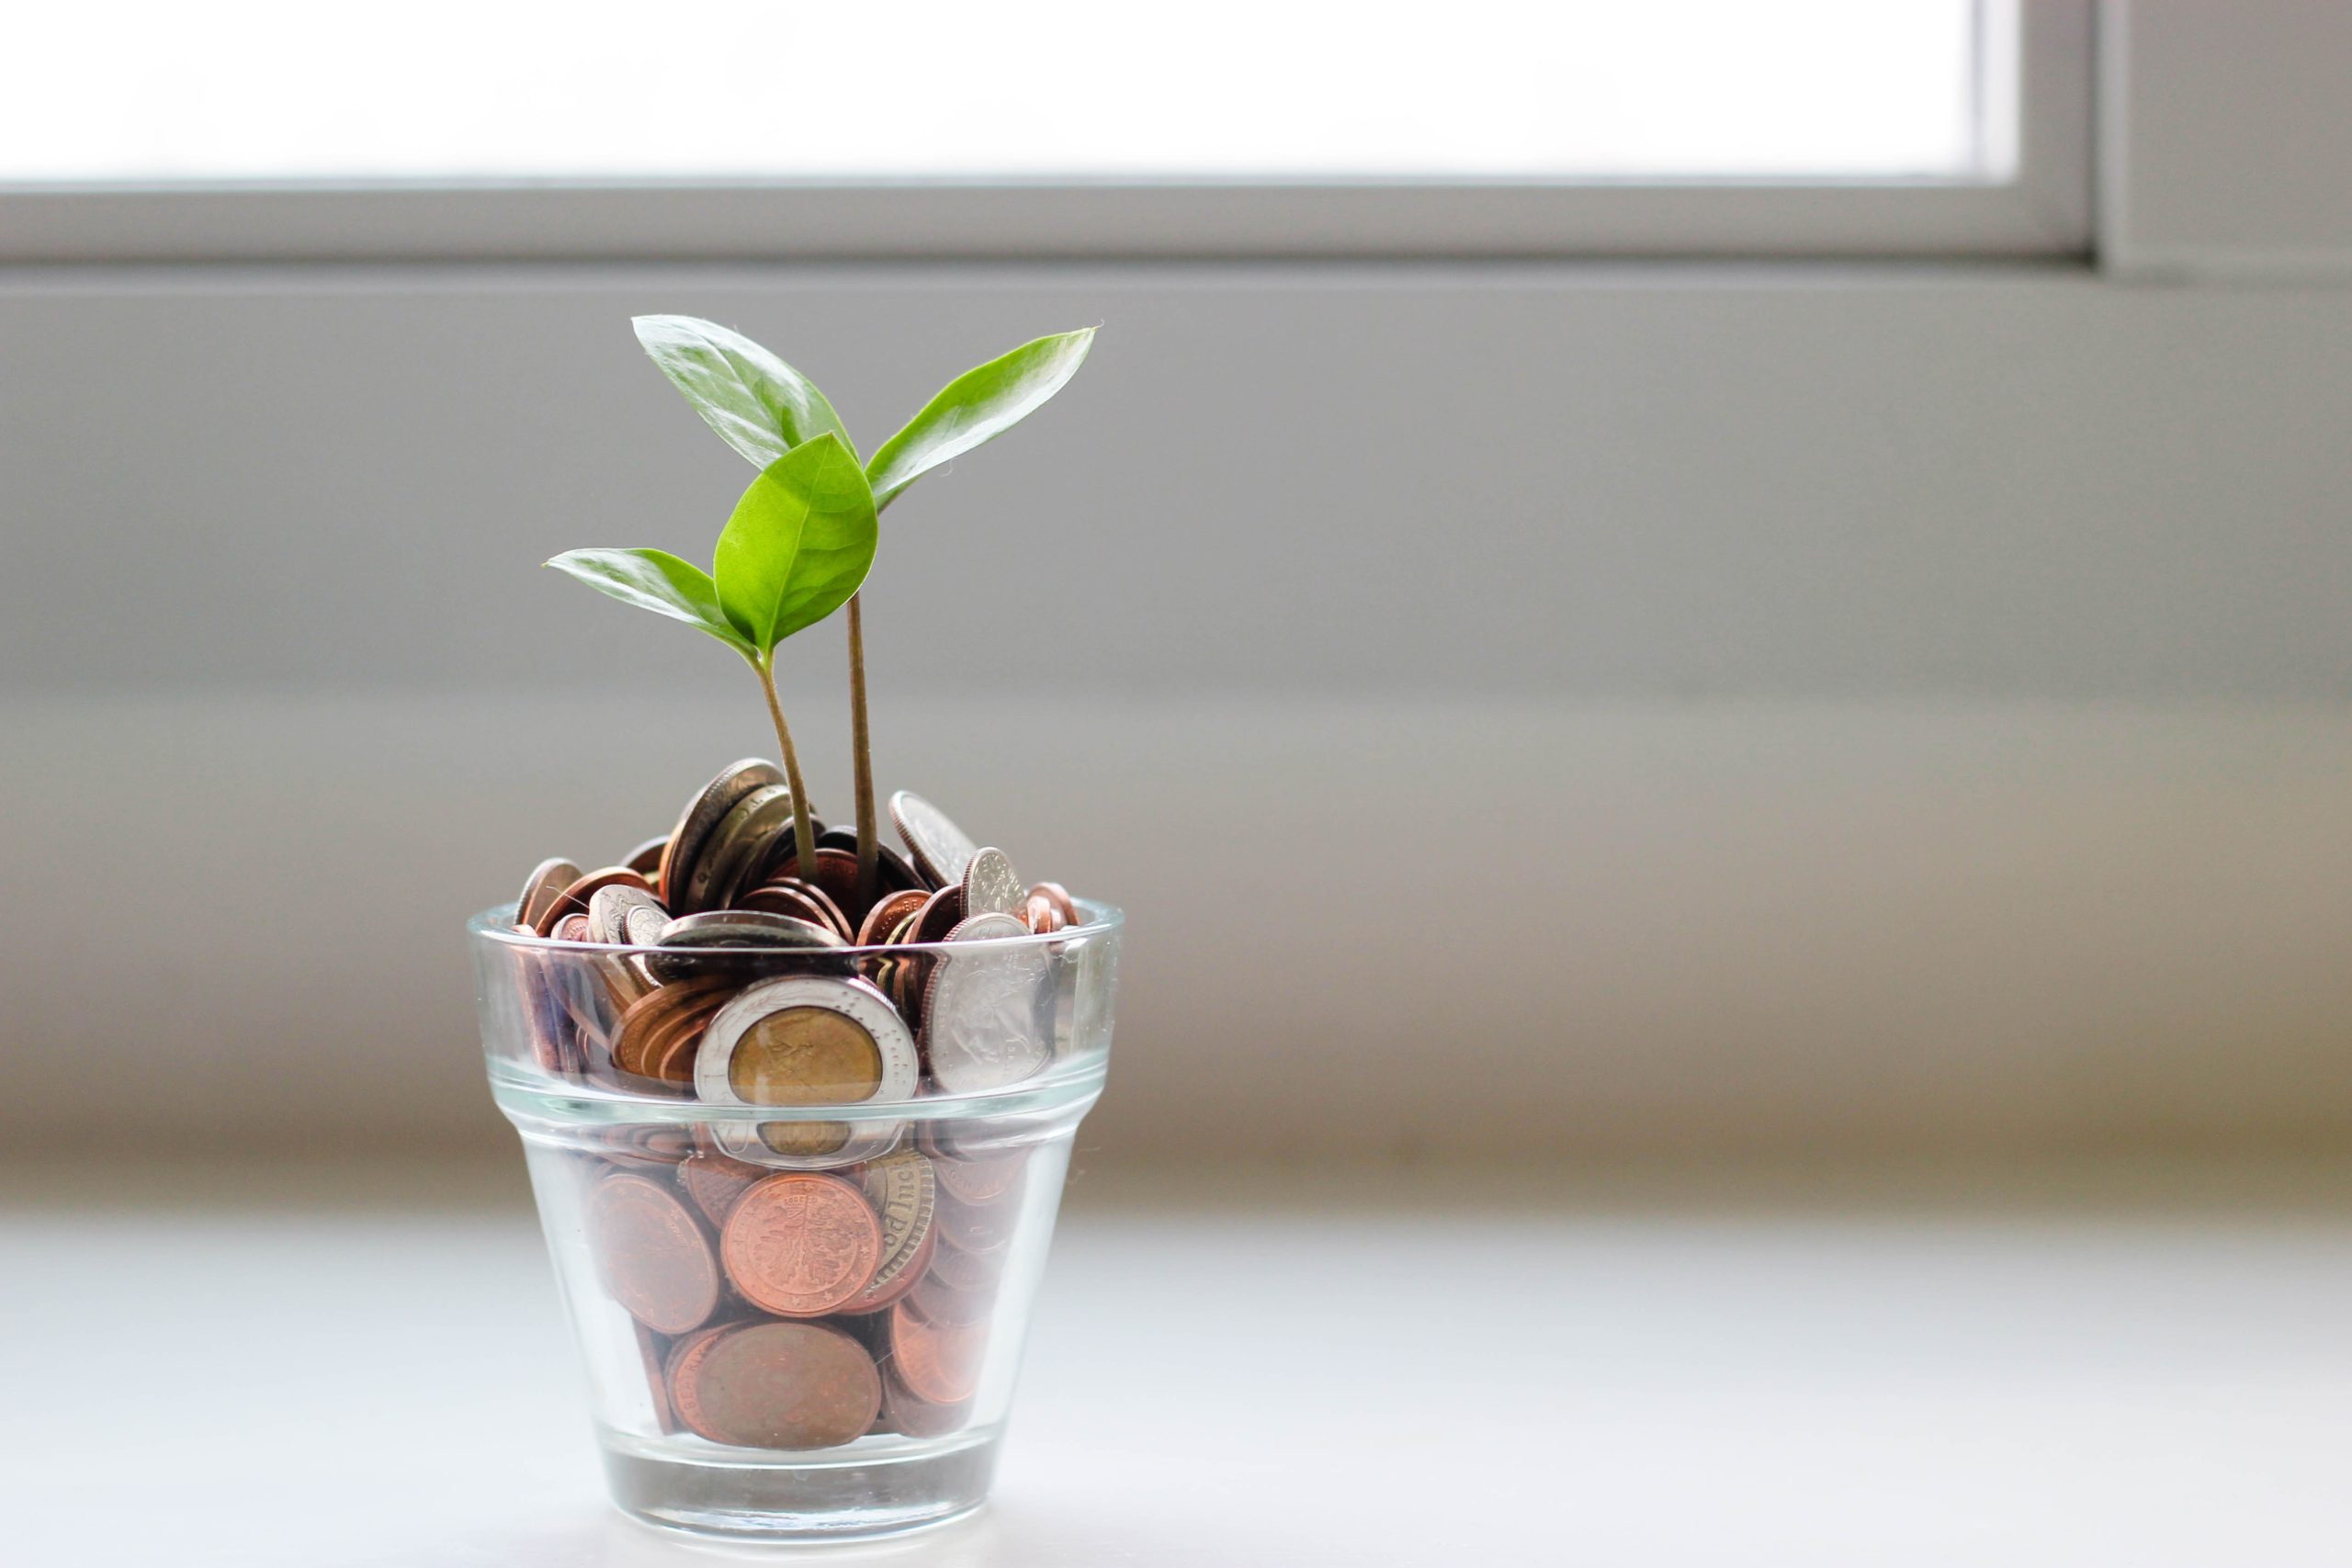 plant in jar of money coins